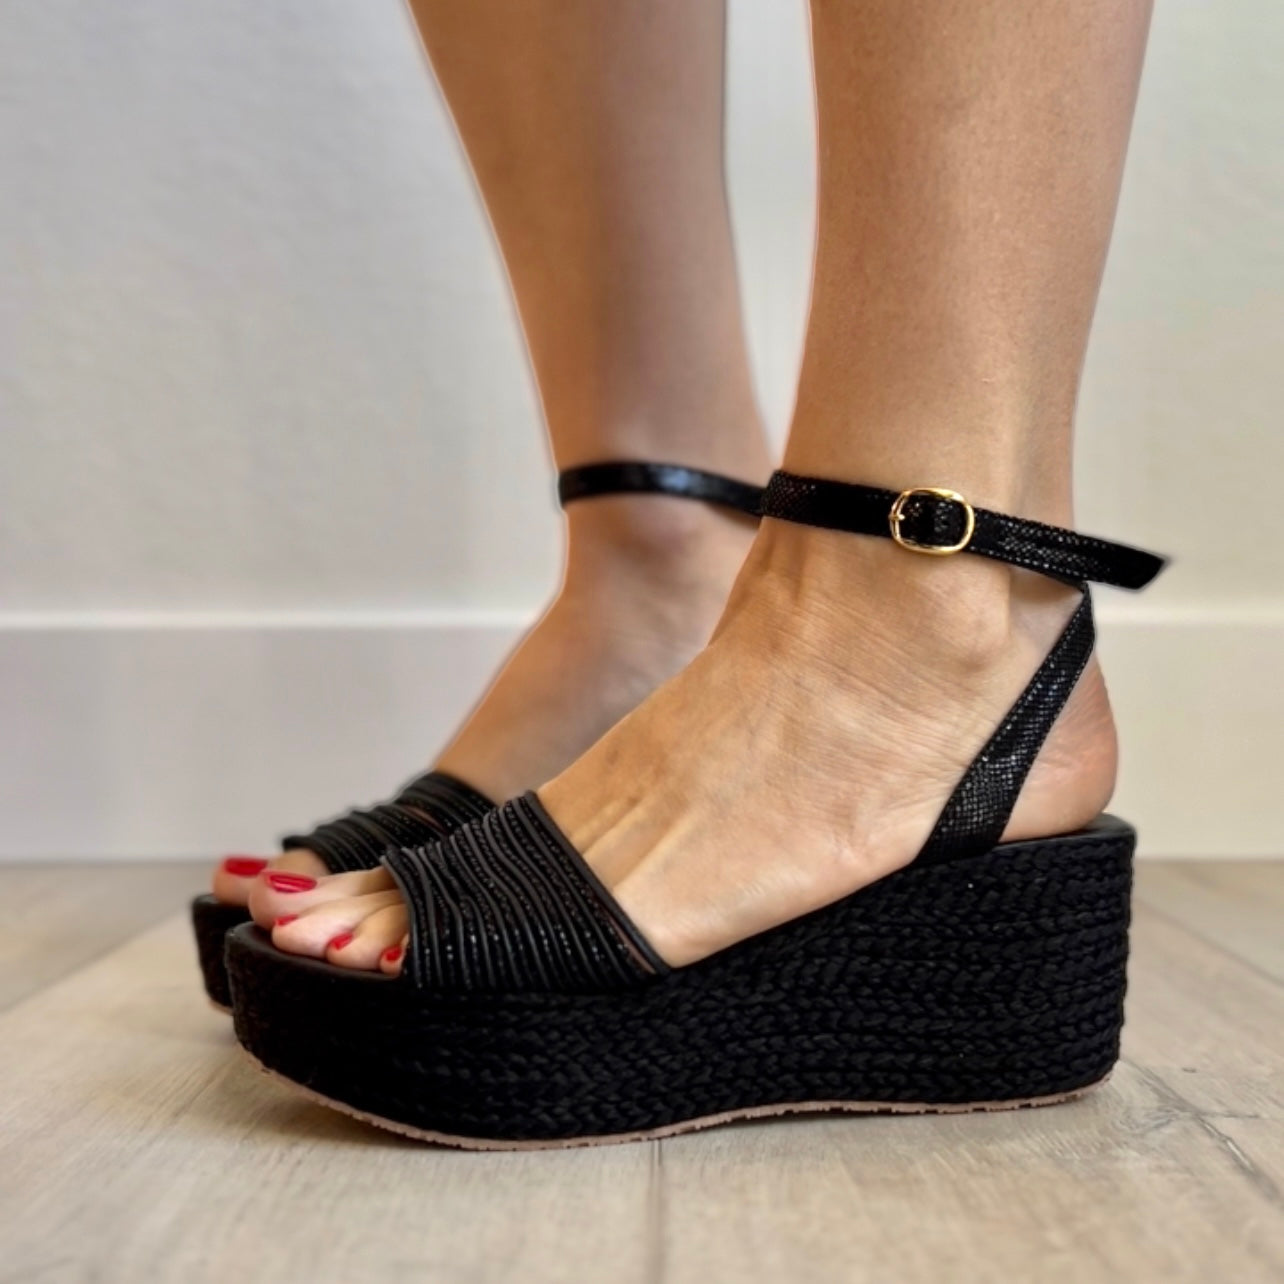 Black Holly Espadrilles Low High by Nataly Mendez Upper material genuine leather Insole lining made of leather Flexible rubber sole Hand Made 3 inch heel height 1.75 inch platform